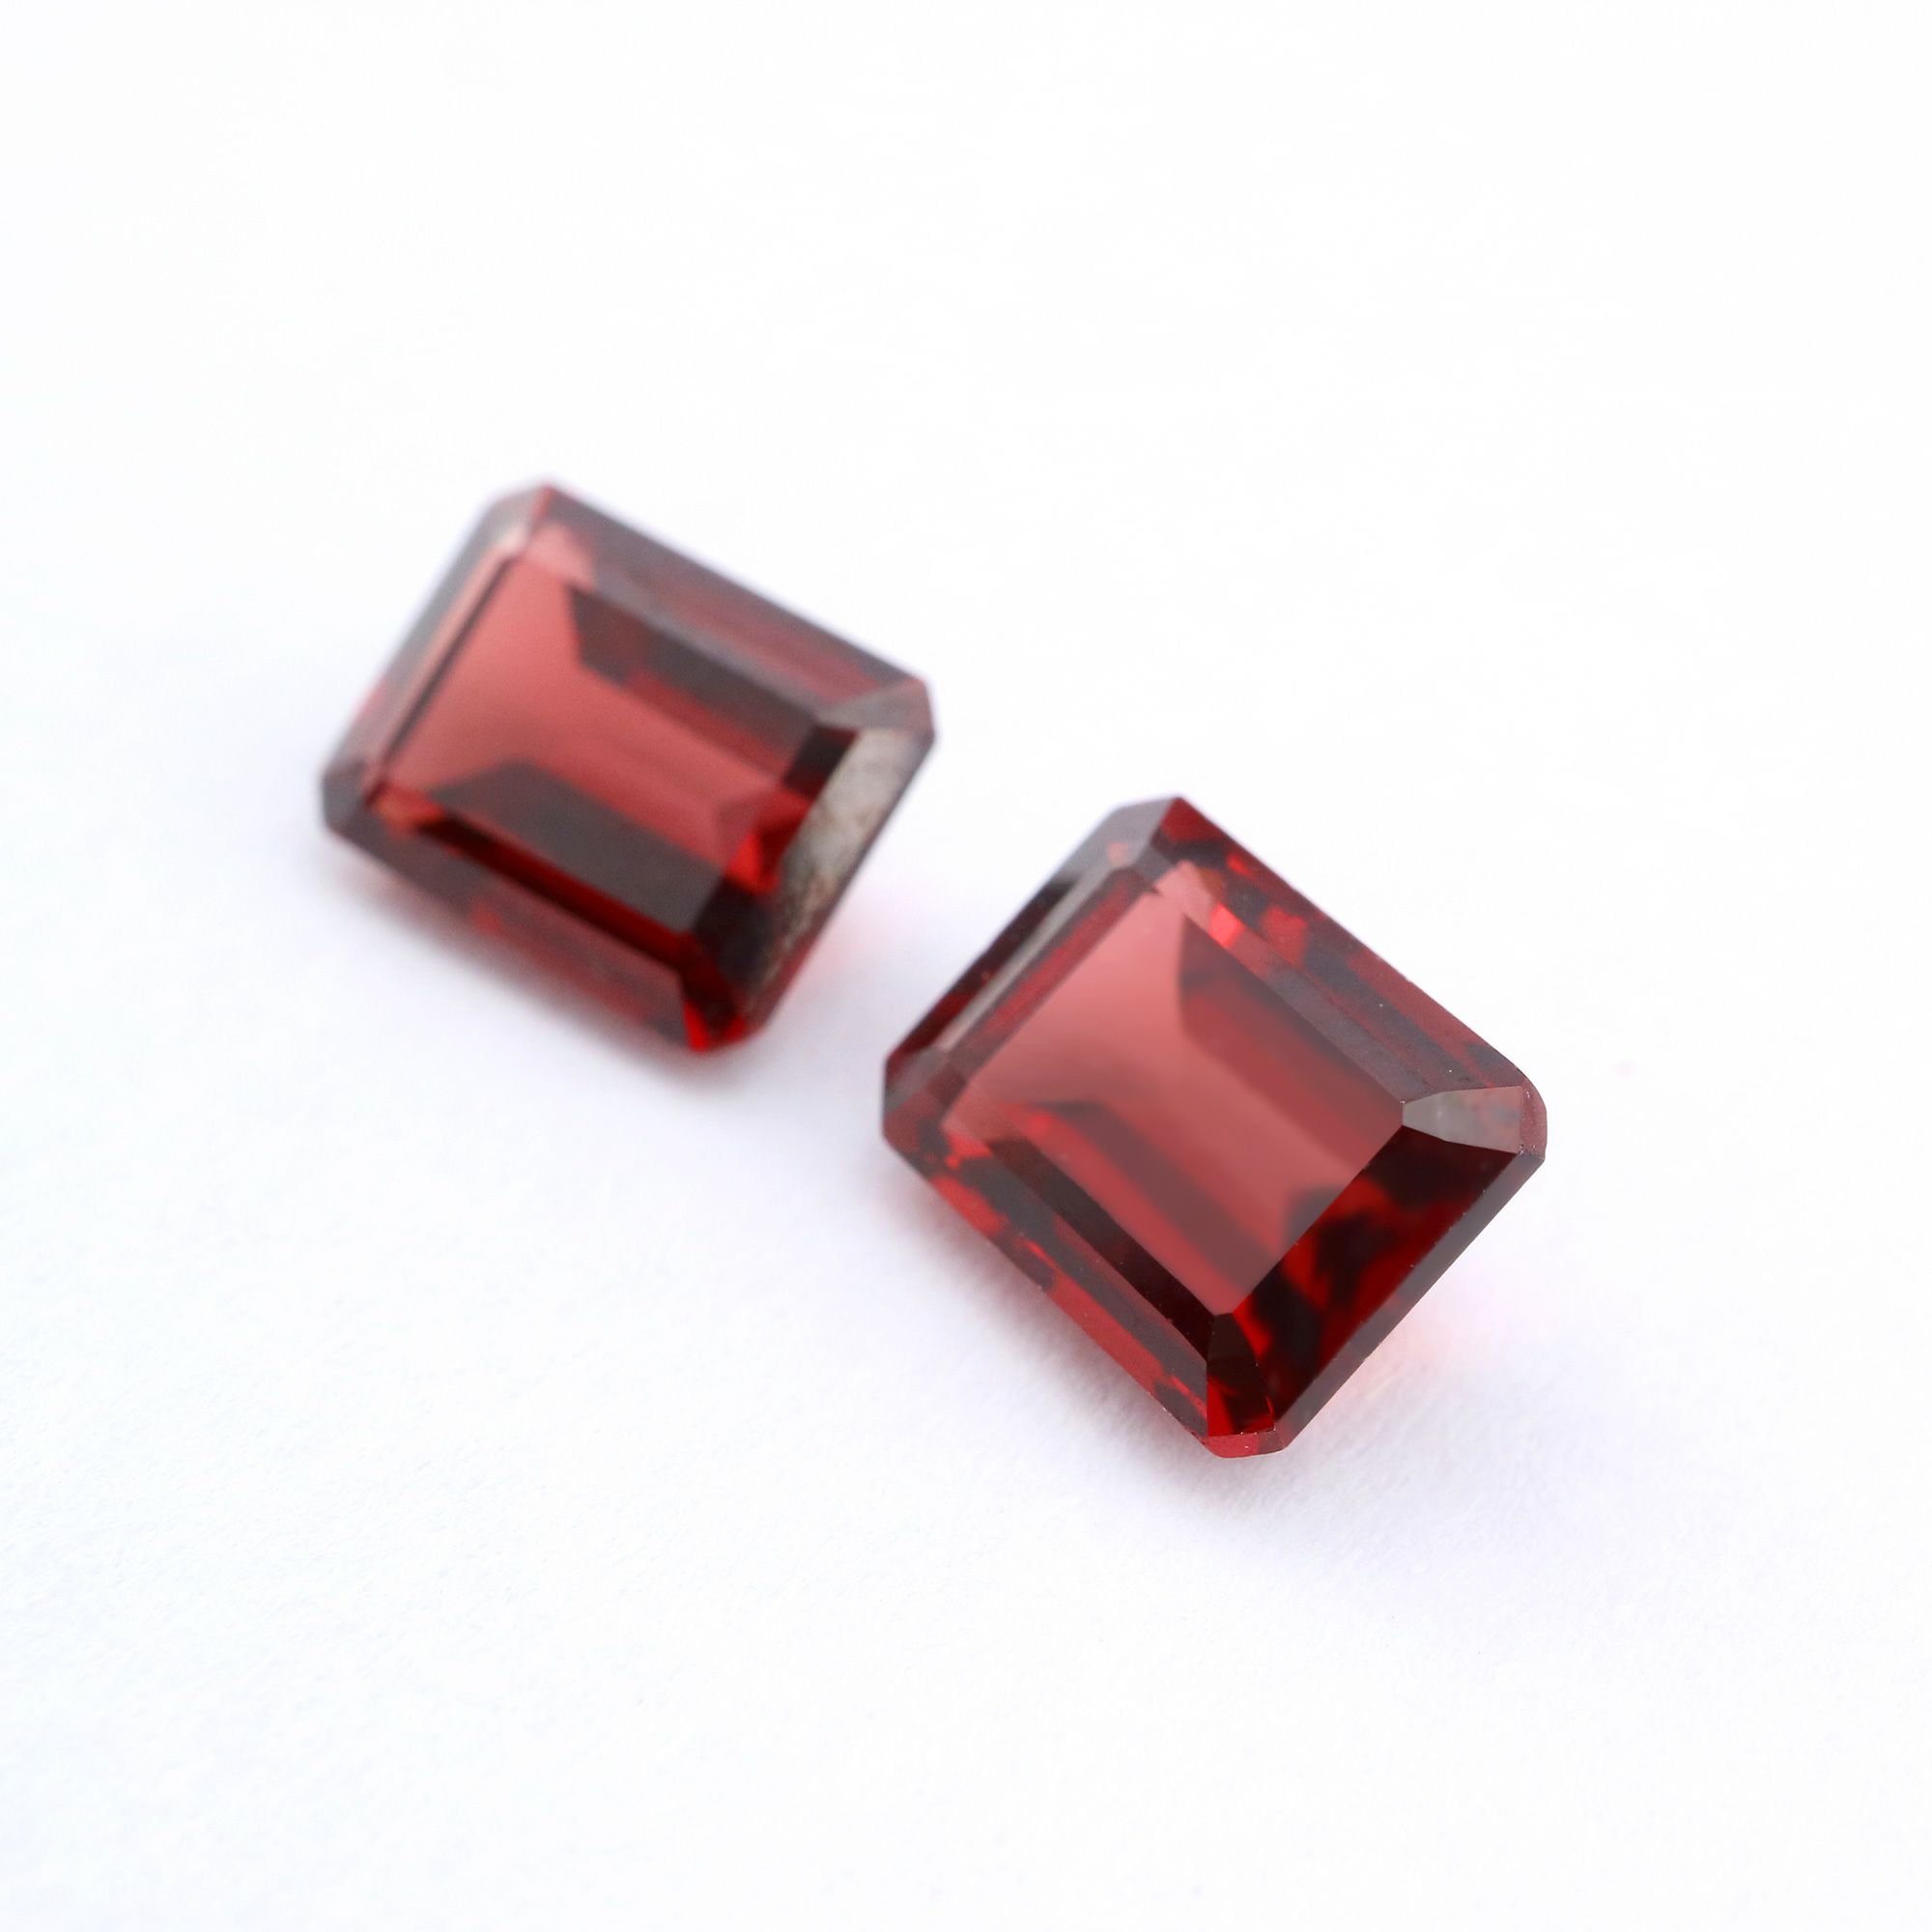 5Pcs Natural Red Garnet January Birthstone Emerald Cut Faceted Loose Gemstone Nature Semi Precious Stone DIY Jewelry Supplies 4170008 - Click Image to Close